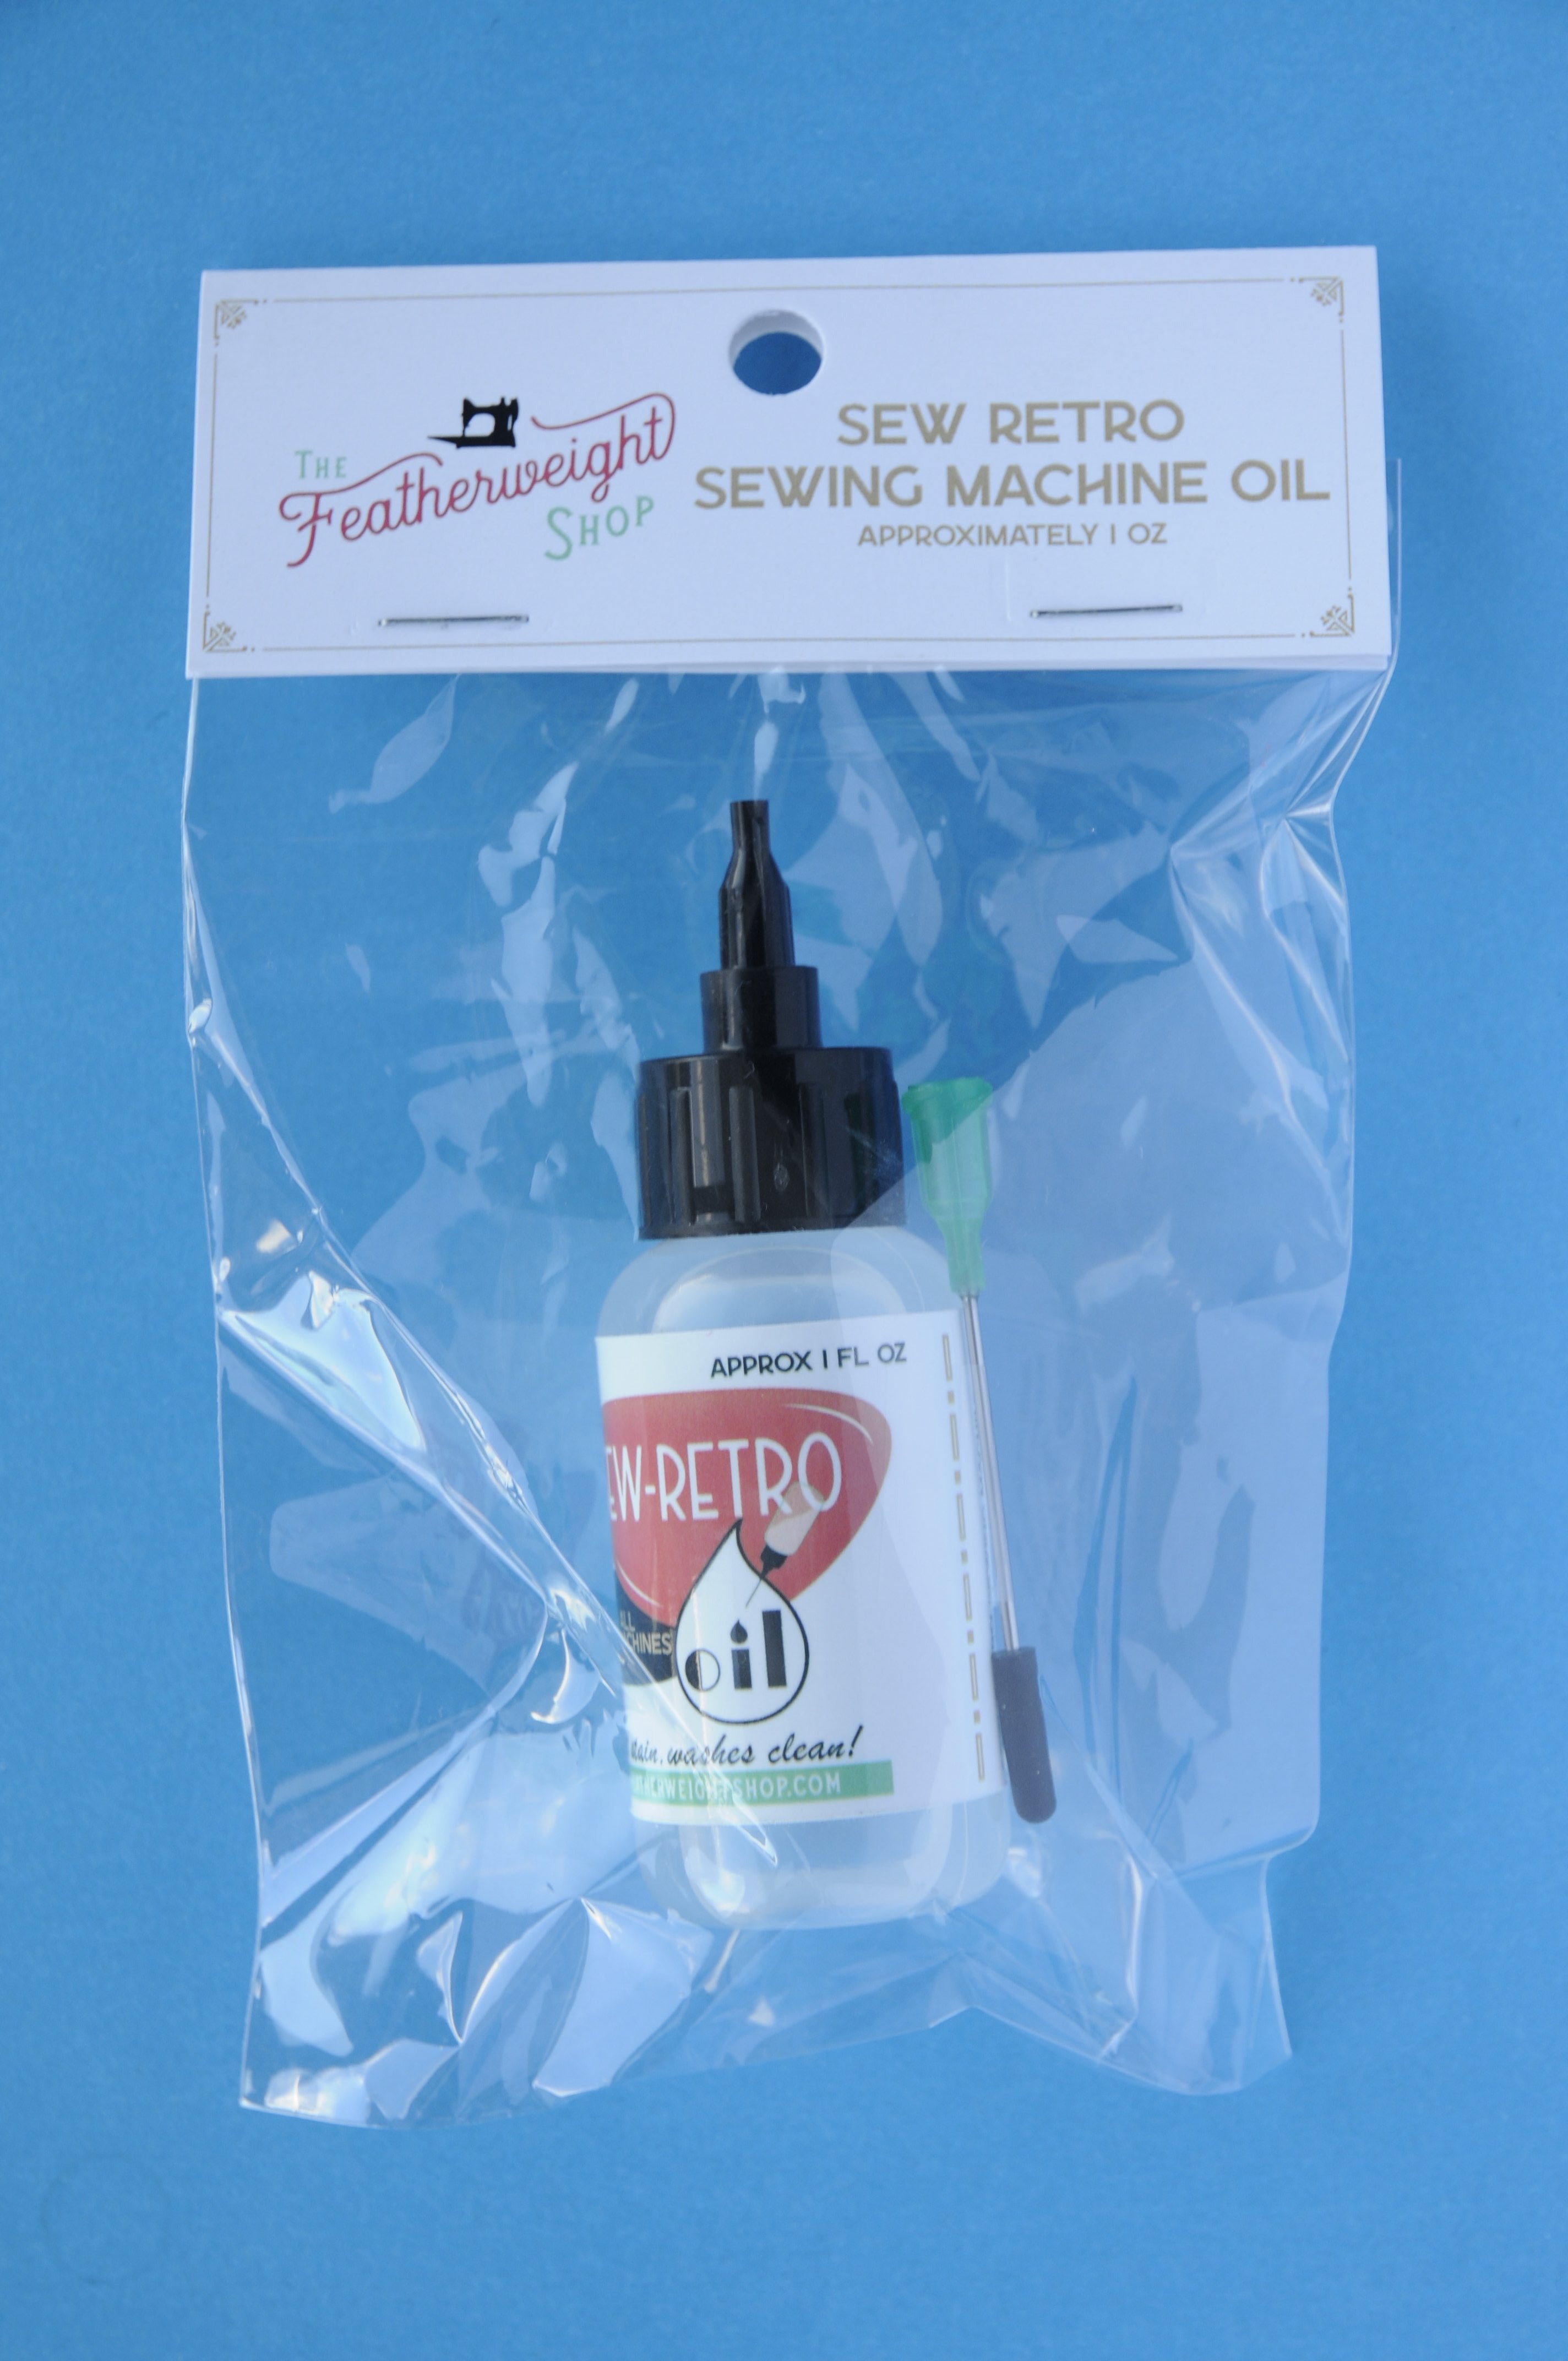 SEW-RETRO Grease, Motor & Gear Lubricant for Vintage and Antique Sewing Machines